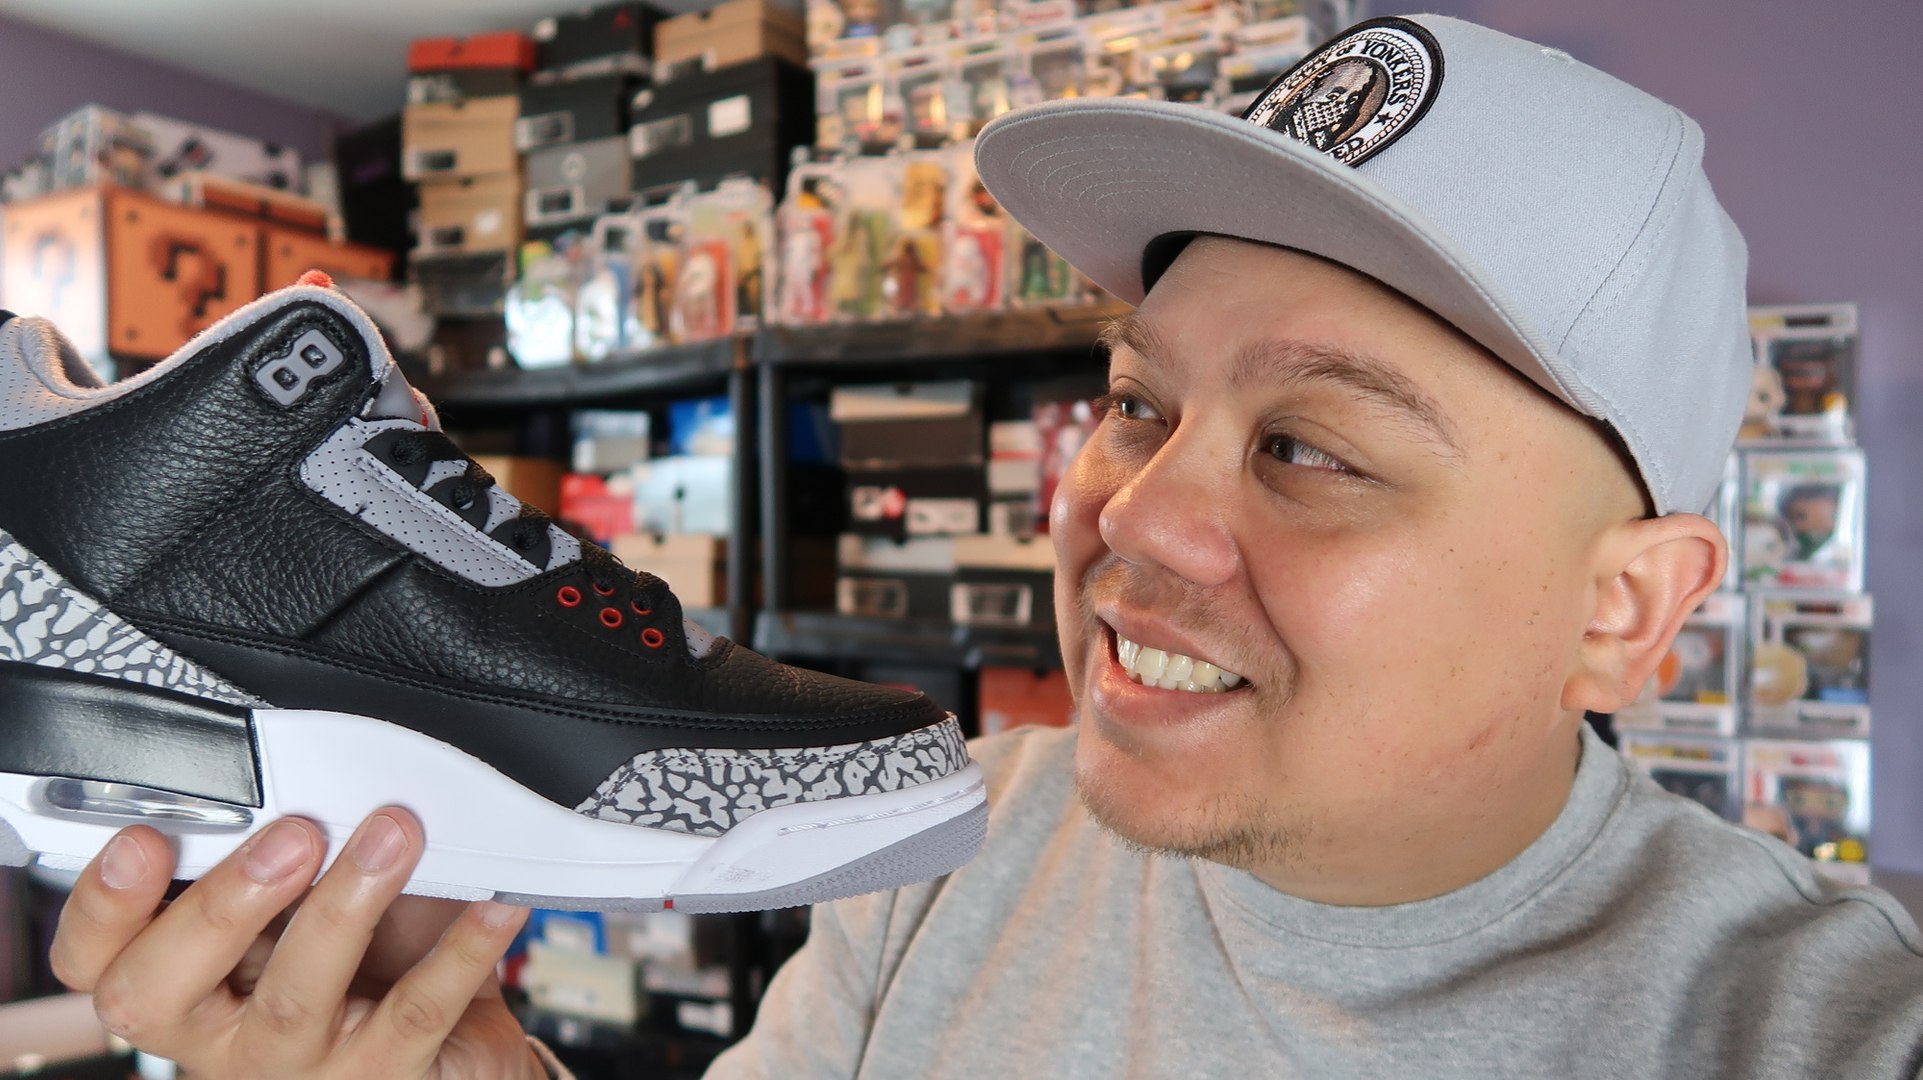 Air Jordan 3 III Black Cement OG 2018 Retro Unboxing On Feet Review - video  Dailymotion